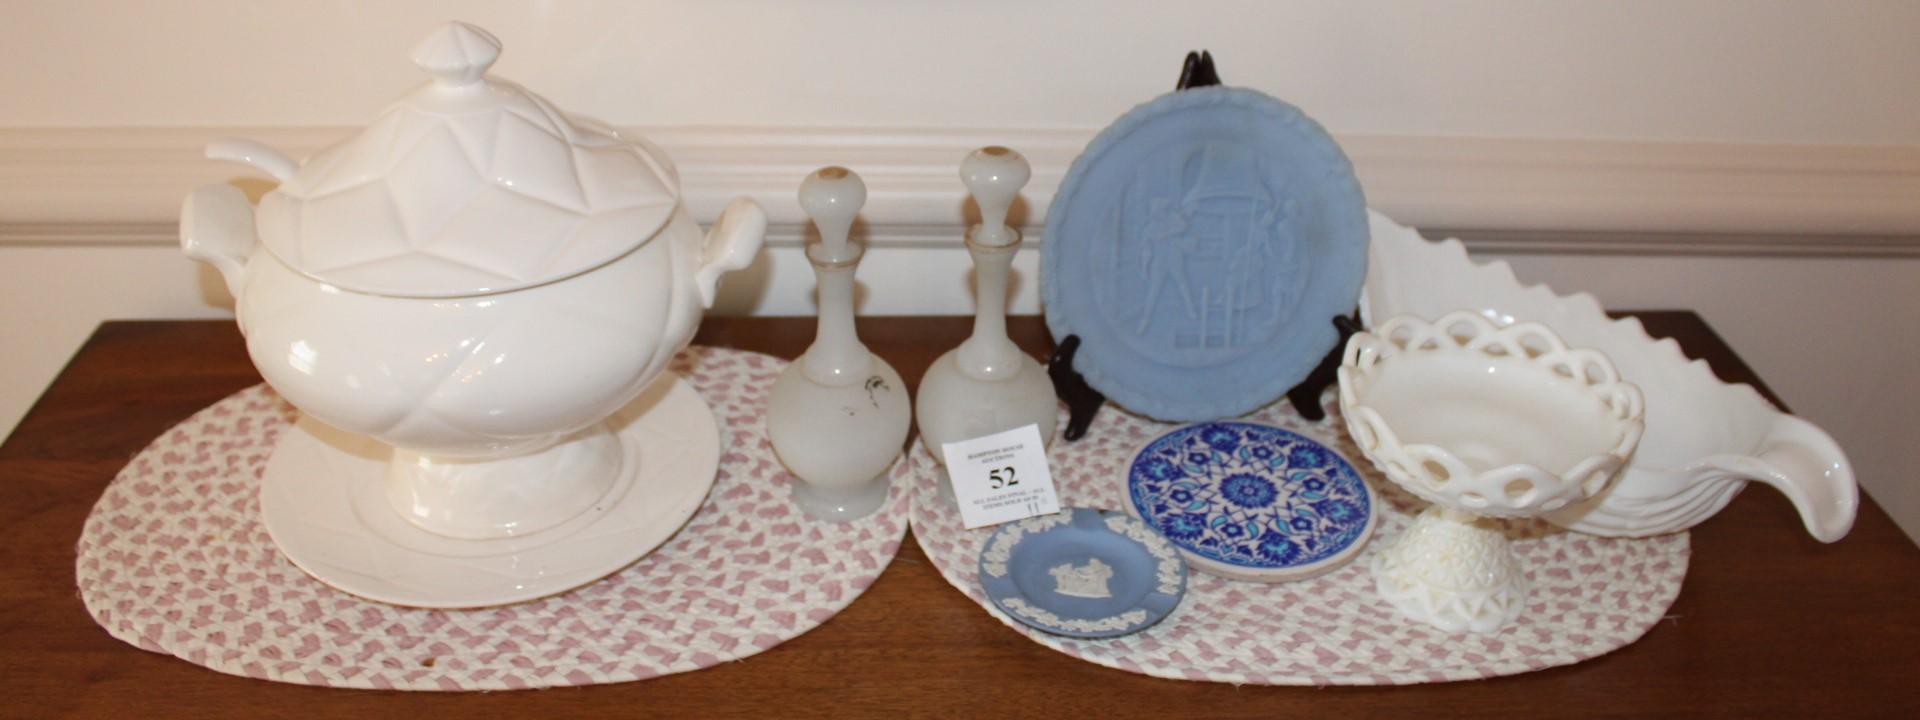 GROUP OF 11 PIECES OF TABLEWARE & DECORATIVES